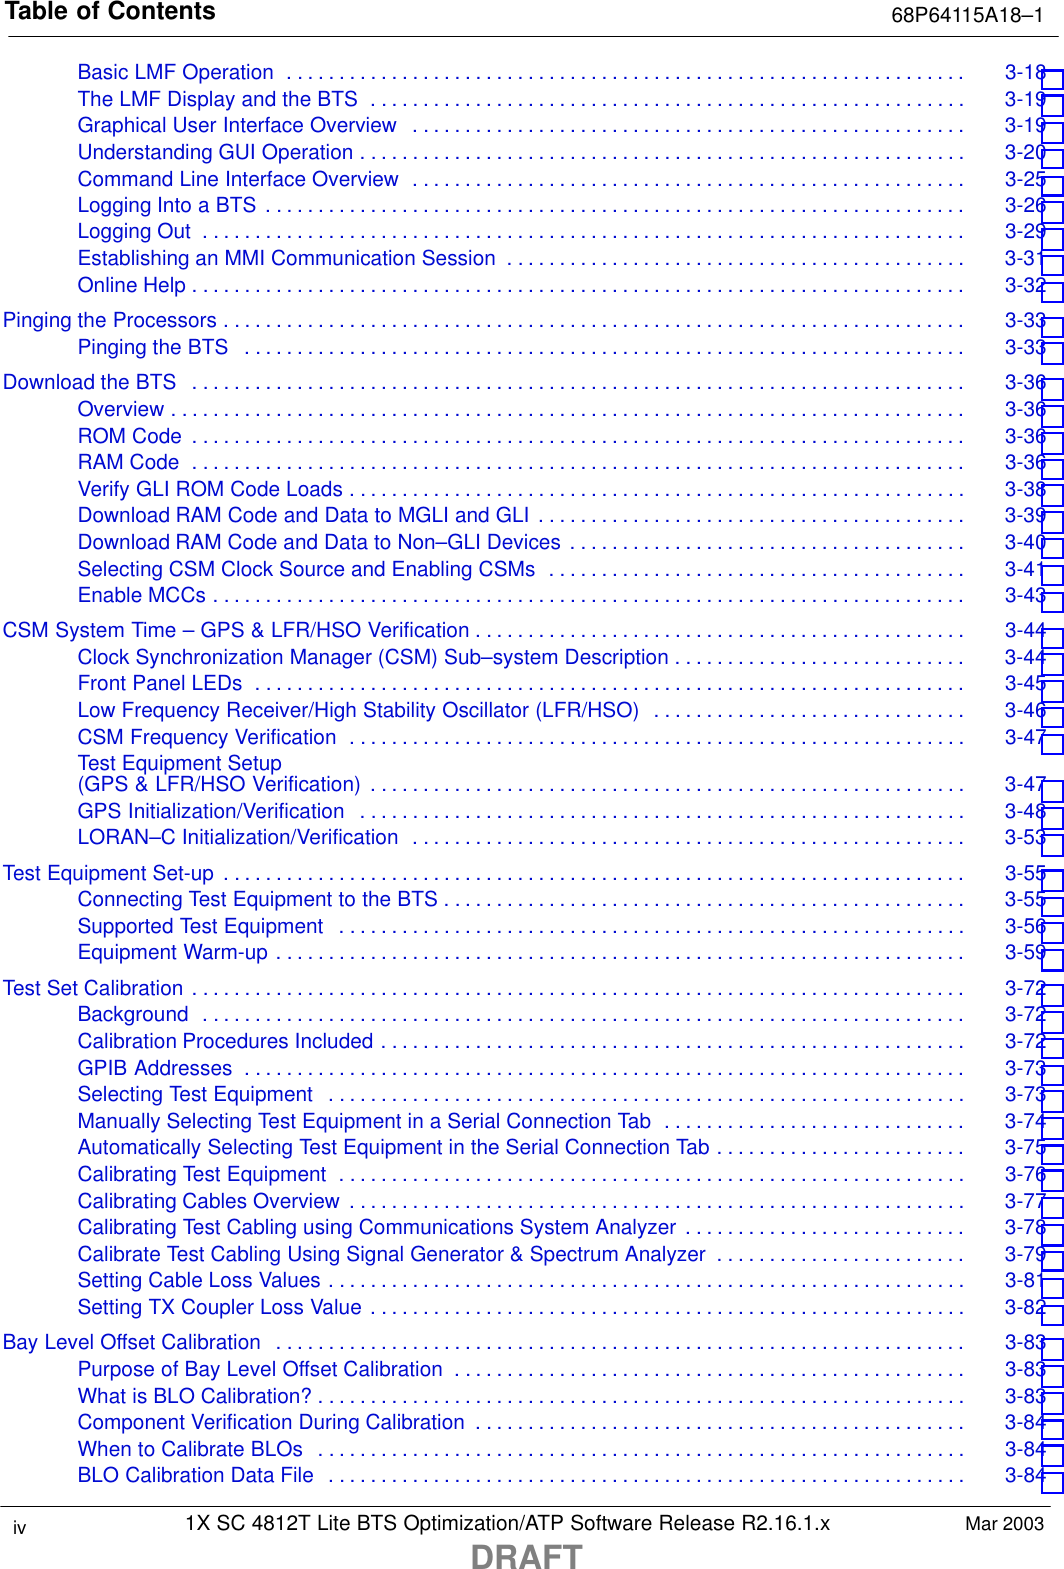 Table of Contents 68P64115A18–11X SC 4812T Lite BTS Optimization/ATP Software Release R2.16.1.xDRAFTiv Mar 2003Basic LMF Operation 3-18 . . . . . . . . . . . . . . . . . . . . . . . . . . . . . . . . . . . . . . . . . . . . . . . . . . . . . . . . . . . . . . . . . The LMF Display and the BTS 3-19 . . . . . . . . . . . . . . . . . . . . . . . . . . . . . . . . . . . . . . . . . . . . . . . . . . . . . . . . . Graphical User Interface Overview 3-19 . . . . . . . . . . . . . . . . . . . . . . . . . . . . . . . . . . . . . . . . . . . . . . . . . . . . . Understanding GUI Operation 3-20 . . . . . . . . . . . . . . . . . . . . . . . . . . . . . . . . . . . . . . . . . . . . . . . . . . . . . . . . . . Command Line Interface Overview 3-25 . . . . . . . . . . . . . . . . . . . . . . . . . . . . . . . . . . . . . . . . . . . . . . . . . . . . . Logging Into a BTS 3-26 . . . . . . . . . . . . . . . . . . . . . . . . . . . . . . . . . . . . . . . . . . . . . . . . . . . . . . . . . . . . . . . . . . . Logging Out 3-29 . . . . . . . . . . . . . . . . . . . . . . . . . . . . . . . . . . . . . . . . . . . . . . . . . . . . . . . . . . . . . . . . . . . . . . . . . Establishing an MMI Communication Session 3-31 . . . . . . . . . . . . . . . . . . . . . . . . . . . . . . . . . . . . . . . . . . . . Online Help 3-32 . . . . . . . . . . . . . . . . . . . . . . . . . . . . . . . . . . . . . . . . . . . . . . . . . . . . . . . . . . . . . . . . . . . . . . . . . . Pinging the Processors 3-33 . . . . . . . . . . . . . . . . . . . . . . . . . . . . . . . . . . . . . . . . . . . . . . . . . . . . . . . . . . . . . . . . . . . . . . . Pinging the BTS 3-33 . . . . . . . . . . . . . . . . . . . . . . . . . . . . . . . . . . . . . . . . . . . . . . . . . . . . . . . . . . . . . . . . . . . . . Download the BTS 3-36 . . . . . . . . . . . . . . . . . . . . . . . . . . . . . . . . . . . . . . . . . . . . . . . . . . . . . . . . . . . . . . . . . . . . . . . . . . Overview 3-36 . . . . . . . . . . . . . . . . . . . . . . . . . . . . . . . . . . . . . . . . . . . . . . . . . . . . . . . . . . . . . . . . . . . . . . . . . . . . ROM Code 3-36 . . . . . . . . . . . . . . . . . . . . . . . . . . . . . . . . . . . . . . . . . . . . . . . . . . . . . . . . . . . . . . . . . . . . . . . . . . RAM Code 3-36 . . . . . . . . . . . . . . . . . . . . . . . . . . . . . . . . . . . . . . . . . . . . . . . . . . . . . . . . . . . . . . . . . . . . . . . . . . Verify GLI ROM Code Loads 3-38 . . . . . . . . . . . . . . . . . . . . . . . . . . . . . . . . . . . . . . . . . . . . . . . . . . . . . . . . . . . Download RAM Code and Data to MGLI and GLI 3-39 . . . . . . . . . . . . . . . . . . . . . . . . . . . . . . . . . . . . . . . . . Download RAM Code and Data to Non–GLI Devices 3-40 . . . . . . . . . . . . . . . . . . . . . . . . . . . . . . . . . . . . . . Selecting CSM Clock Source and Enabling CSMs 3-41 . . . . . . . . . . . . . . . . . . . . . . . . . . . . . . . . . . . . . . . . Enable MCCs 3-43 . . . . . . . . . . . . . . . . . . . . . . . . . . . . . . . . . . . . . . . . . . . . . . . . . . . . . . . . . . . . . . . . . . . . . . . . CSM System Time – GPS &amp; LFR/HSO Verification 3-44 . . . . . . . . . . . . . . . . . . . . . . . . . . . . . . . . . . . . . . . . . . . . . . . Clock Synchronization Manager (CSM) Sub–system Description 3-44 . . . . . . . . . . . . . . . . . . . . . . . . . . . . Front Panel LEDs 3-45 . . . . . . . . . . . . . . . . . . . . . . . . . . . . . . . . . . . . . . . . . . . . . . . . . . . . . . . . . . . . . . . . . . . . Low Frequency Receiver/High Stability Oscillator (LFR/HSO) 3-46 . . . . . . . . . . . . . . . . . . . . . . . . . . . . . . CSM Frequency Verification 3-47 . . . . . . . . . . . . . . . . . . . . . . . . . . . . . . . . . . . . . . . . . . . . . . . . . . . . . . . . . . . Test Equipment Setup (GPS &amp; LFR/HSO Verification) 3-47 . . . . . . . . . . . . . . . . . . . . . . . . . . . . . . . . . . . . . . . . . . . . . . . . . . . . . . . . . GPS Initialization/Verification 3-48 . . . . . . . . . . . . . . . . . . . . . . . . . . . . . . . . . . . . . . . . . . . . . . . . . . . . . . . . . . LORAN–C Initialization/Verification 3-53 . . . . . . . . . . . . . . . . . . . . . . . . . . . . . . . . . . . . . . . . . . . . . . . . . . . . . Test Equipment Set-up 3-55 . . . . . . . . . . . . . . . . . . . . . . . . . . . . . . . . . . . . . . . . . . . . . . . . . . . . . . . . . . . . . . . . . . . . . . . Connecting Test Equipment to the BTS 3-55 . . . . . . . . . . . . . . . . . . . . . . . . . . . . . . . . . . . . . . . . . . . . . . . . . . Supported Test Equipment 3-56 . . . . . . . . . . . . . . . . . . . . . . . . . . . . . . . . . . . . . . . . . . . . . . . . . . . . . . . . . . . . Equipment Warm-up 3-59 . . . . . . . . . . . . . . . . . . . . . . . . . . . . . . . . . . . . . . . . . . . . . . . . . . . . . . . . . . . . . . . . . . Test Set Calibration 3-72 . . . . . . . . . . . . . . . . . . . . . . . . . . . . . . . . . . . . . . . . . . . . . . . . . . . . . . . . . . . . . . . . . . . . . . . . . . Background 3-72 . . . . . . . . . . . . . . . . . . . . . . . . . . . . . . . . . . . . . . . . . . . . . . . . . . . . . . . . . . . . . . . . . . . . . . . . . Calibration Procedures Included 3-72 . . . . . . . . . . . . . . . . . . . . . . . . . . . . . . . . . . . . . . . . . . . . . . . . . . . . . . . . GPIB Addresses 3-73 . . . . . . . . . . . . . . . . . . . . . . . . . . . . . . . . . . . . . . . . . . . . . . . . . . . . . . . . . . . . . . . . . . . . . Selecting Test Equipment 3-73 . . . . . . . . . . . . . . . . . . . . . . . . . . . . . . . . . . . . . . . . . . . . . . . . . . . . . . . . . . . . . Manually Selecting Test Equipment in a Serial Connection Tab 3-74 . . . . . . . . . . . . . . . . . . . . . . . . . . . . . Automatically Selecting Test Equipment in the Serial Connection Tab 3-75 . . . . . . . . . . . . . . . . . . . . . . . . Calibrating Test Equipment 3-76 . . . . . . . . . . . . . . . . . . . . . . . . . . . . . . . . . . . . . . . . . . . . . . . . . . . . . . . . . . . . Calibrating Cables Overview 3-77 . . . . . . . . . . . . . . . . . . . . . . . . . . . . . . . . . . . . . . . . . . . . . . . . . . . . . . . . . . . Calibrating Test Cabling using Communications System Analyzer 3-78 . . . . . . . . . . . . . . . . . . . . . . . . . . . Calibrate Test Cabling Using Signal Generator &amp; Spectrum Analyzer 3-79 . . . . . . . . . . . . . . . . . . . . . . . . Setting Cable Loss Values 3-81 . . . . . . . . . . . . . . . . . . . . . . . . . . . . . . . . . . . . . . . . . . . . . . . . . . . . . . . . . . . . . Setting TX Coupler Loss Value 3-82 . . . . . . . . . . . . . . . . . . . . . . . . . . . . . . . . . . . . . . . . . . . . . . . . . . . . . . . . . Bay Level Offset Calibration 3-83 . . . . . . . . . . . . . . . . . . . . . . . . . . . . . . . . . . . . . . . . . . . . . . . . . . . . . . . . . . . . . . . . . . Purpose of Bay Level Offset Calibration 3-83 . . . . . . . . . . . . . . . . . . . . . . . . . . . . . . . . . . . . . . . . . . . . . . . . . What is BLO Calibration? 3-83 . . . . . . . . . . . . . . . . . . . . . . . . . . . . . . . . . . . . . . . . . . . . . . . . . . . . . . . . . . . . . . Component Verification During Calibration 3-84 . . . . . . . . . . . . . . . . . . . . . . . . . . . . . . . . . . . . . . . . . . . . . . . When to Calibrate BLOs 3-84 . . . . . . . . . . . . . . . . . . . . . . . . . . . . . . . . . . . . . . . . . . . . . . . . . . . . . . . . . . . . . . BLO Calibration Data File 3-84 . . . . . . . . . . . . . . . . . . . . . . . . . . . . . . . . . . . . . . . . . . . . . . . . . . . . . . . . . . . . . 